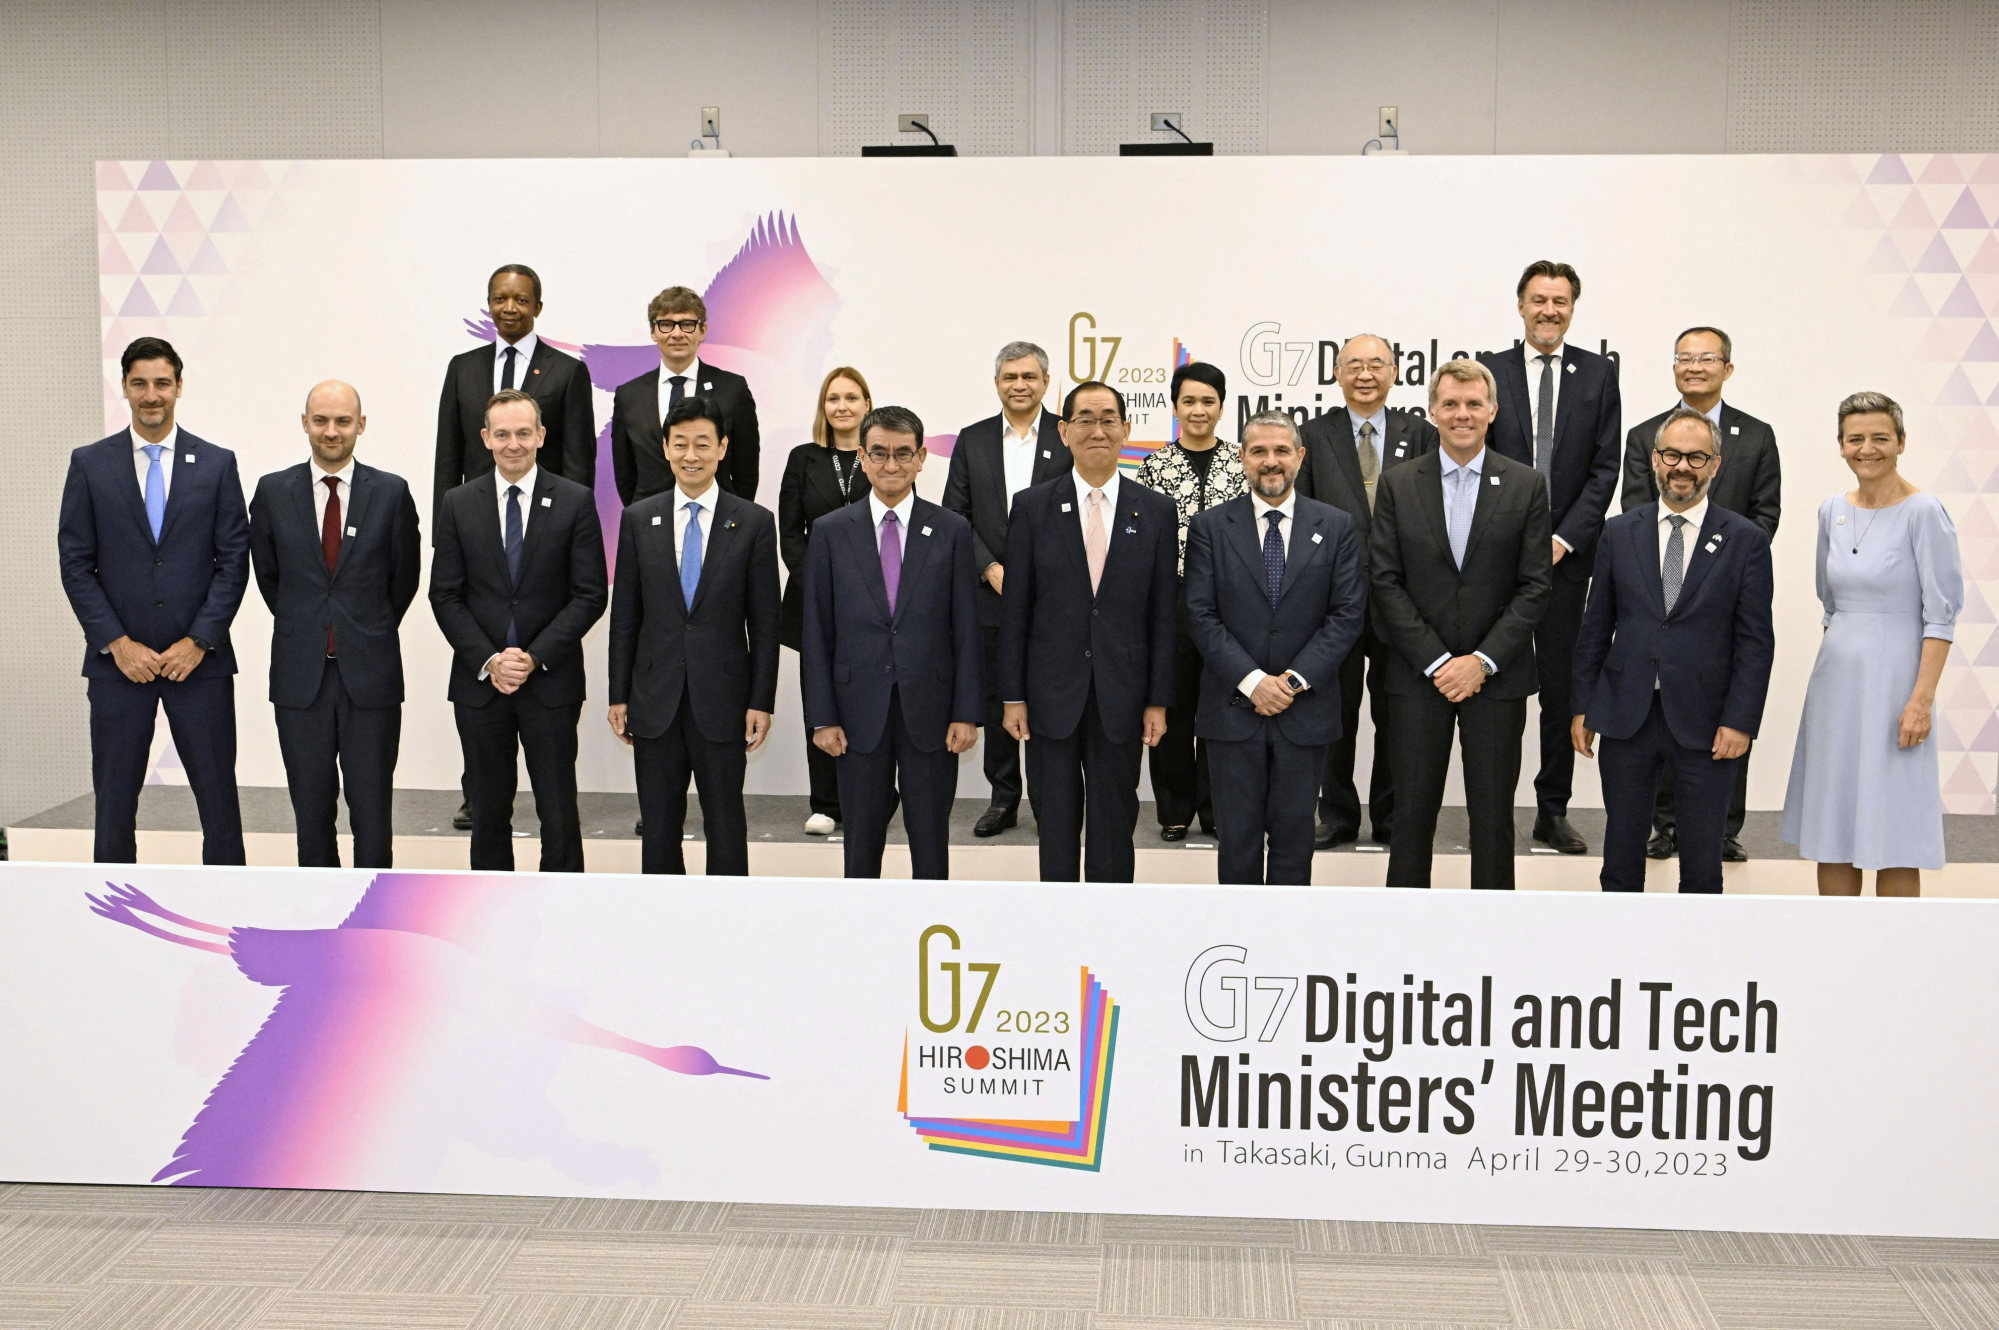 Digital and technology ministers attend a photo session during the G7 Digital and Tech Ministers’ Meeting in Takasaki, Gunma Prefecture, Japan. Photo: Kyodo via Reuters